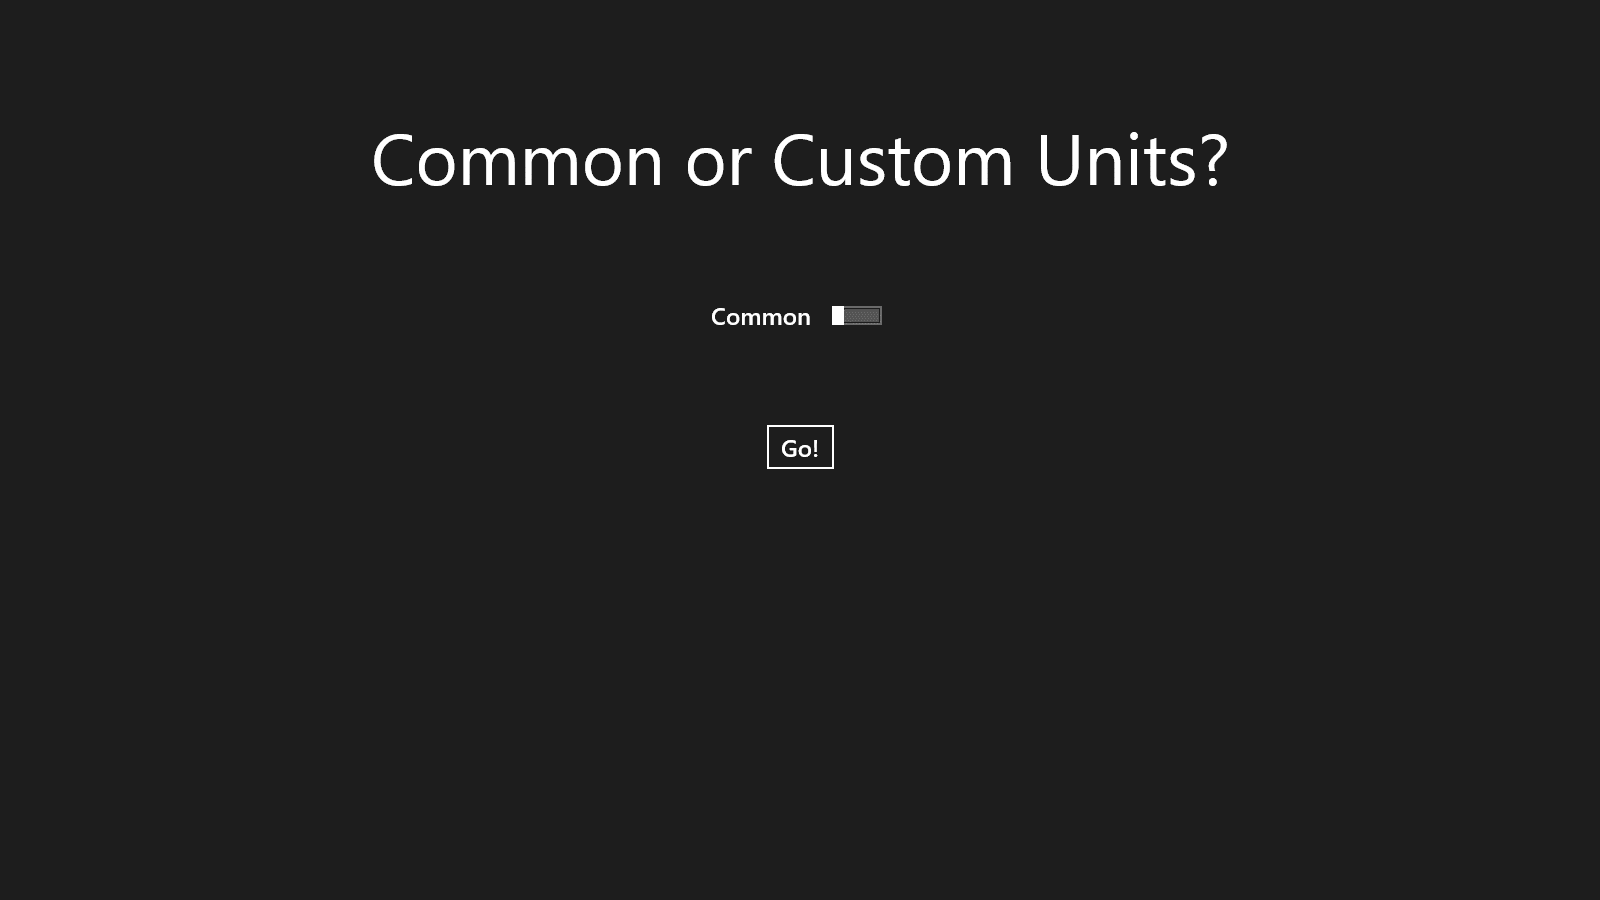 At startup, the user can choose which mode to use: Common or Custom Units.